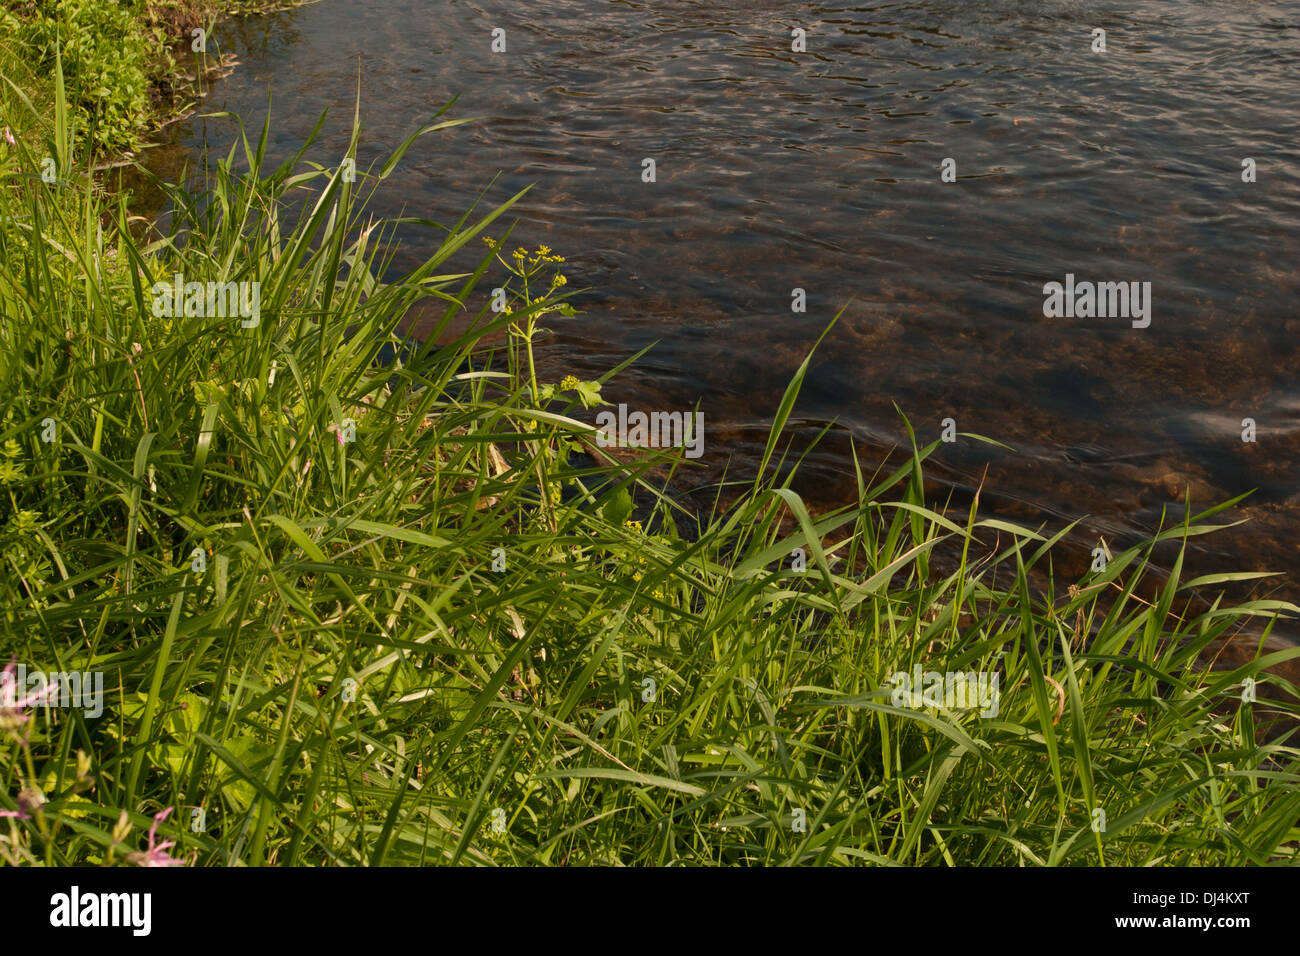 Summer grasses and plants along a gentle river in Adams, Massachusetts. Stock Photo